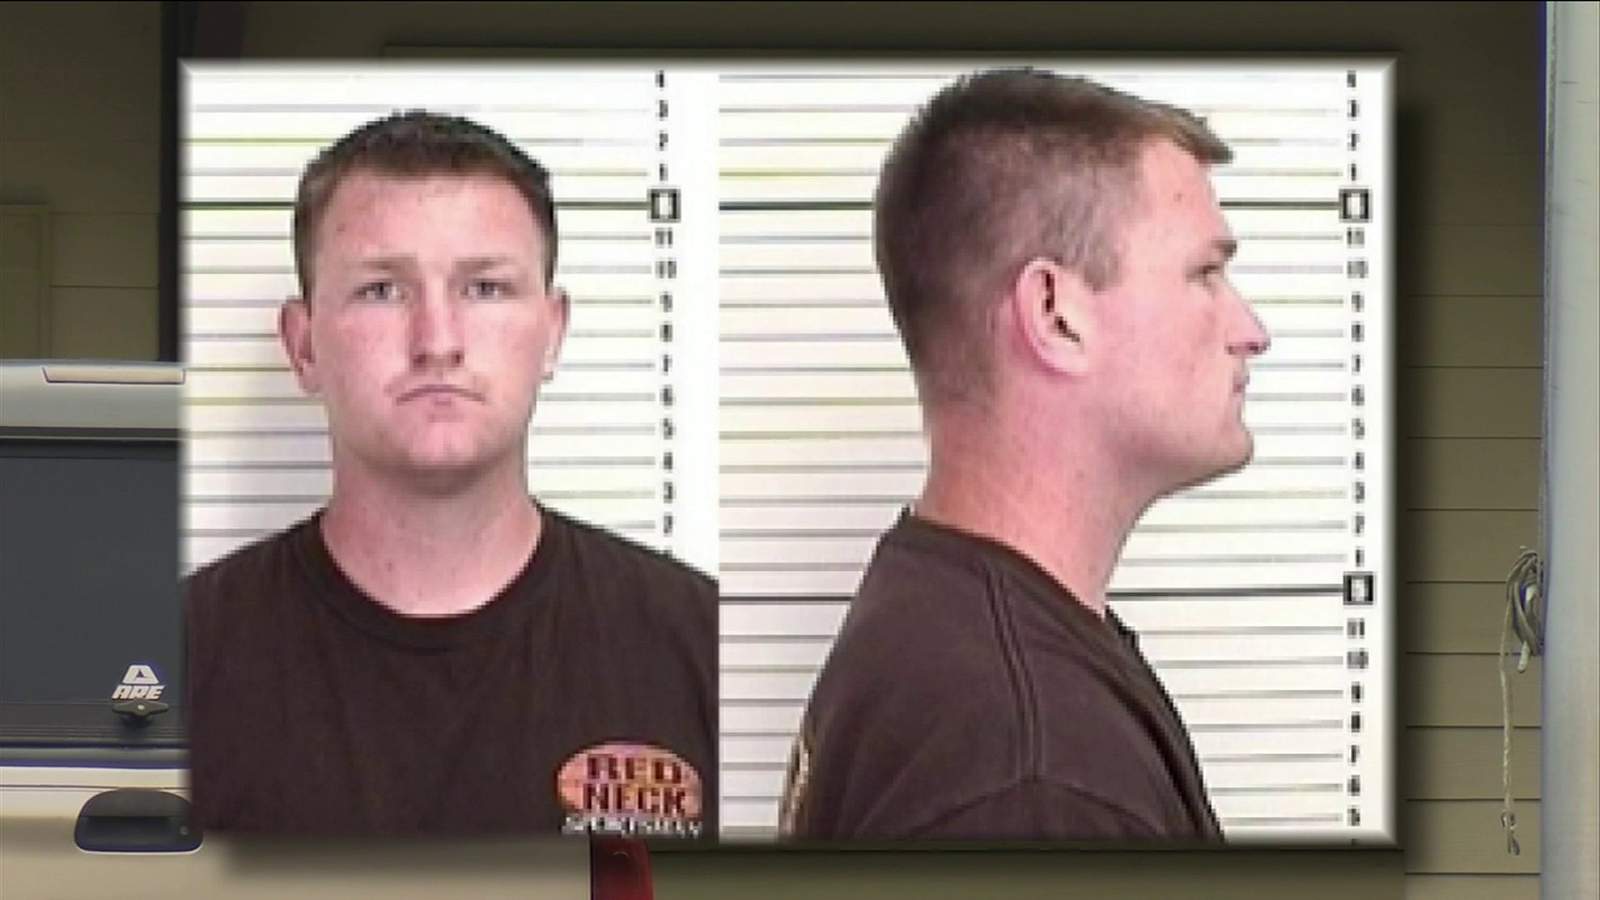 St. Marys firefighter facing new video voyeurism charge